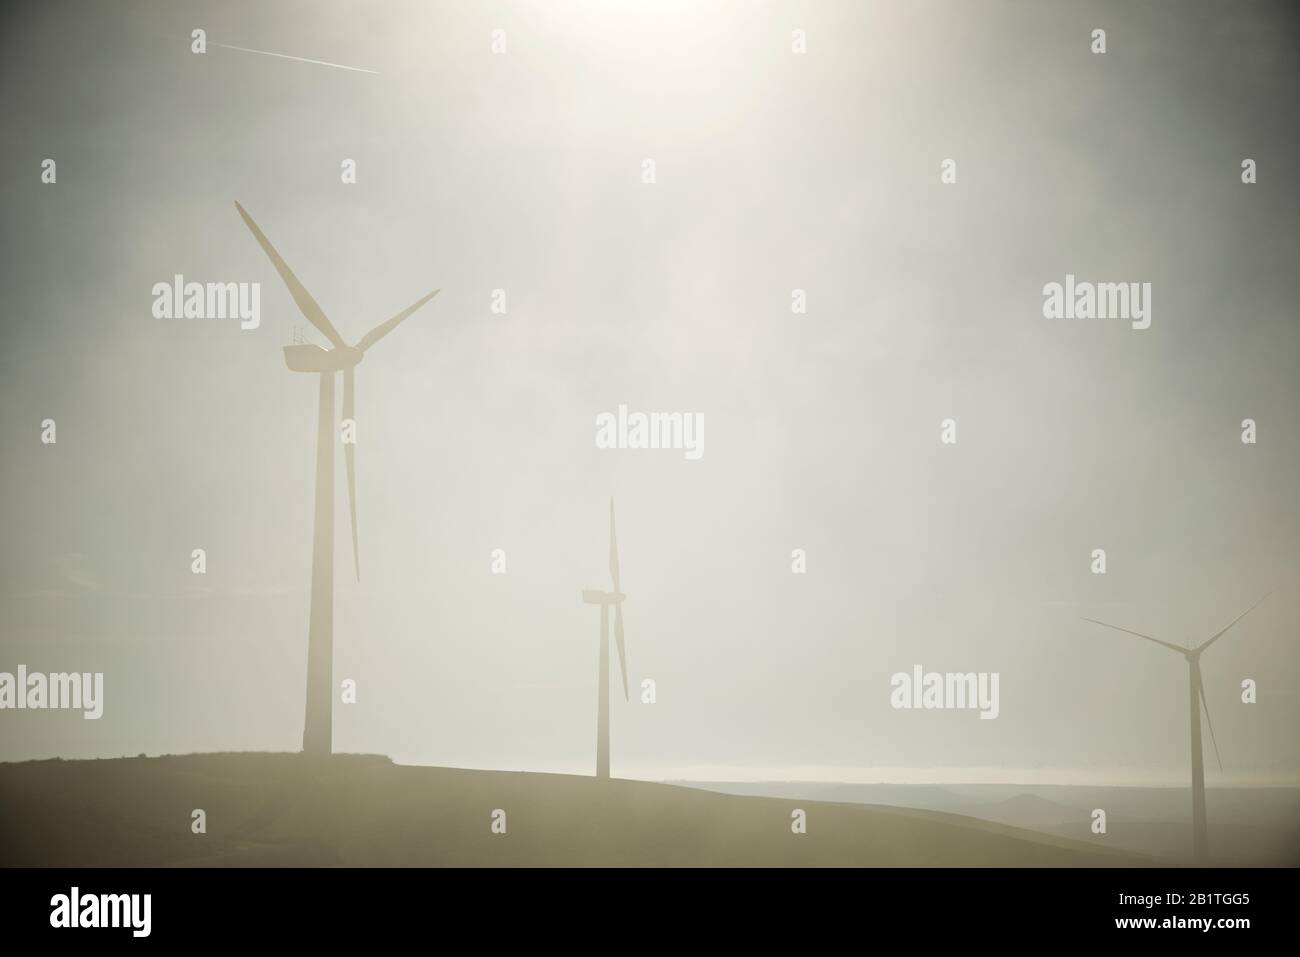 Wind turbines for sustainable energy production in Spain. Stock Photo